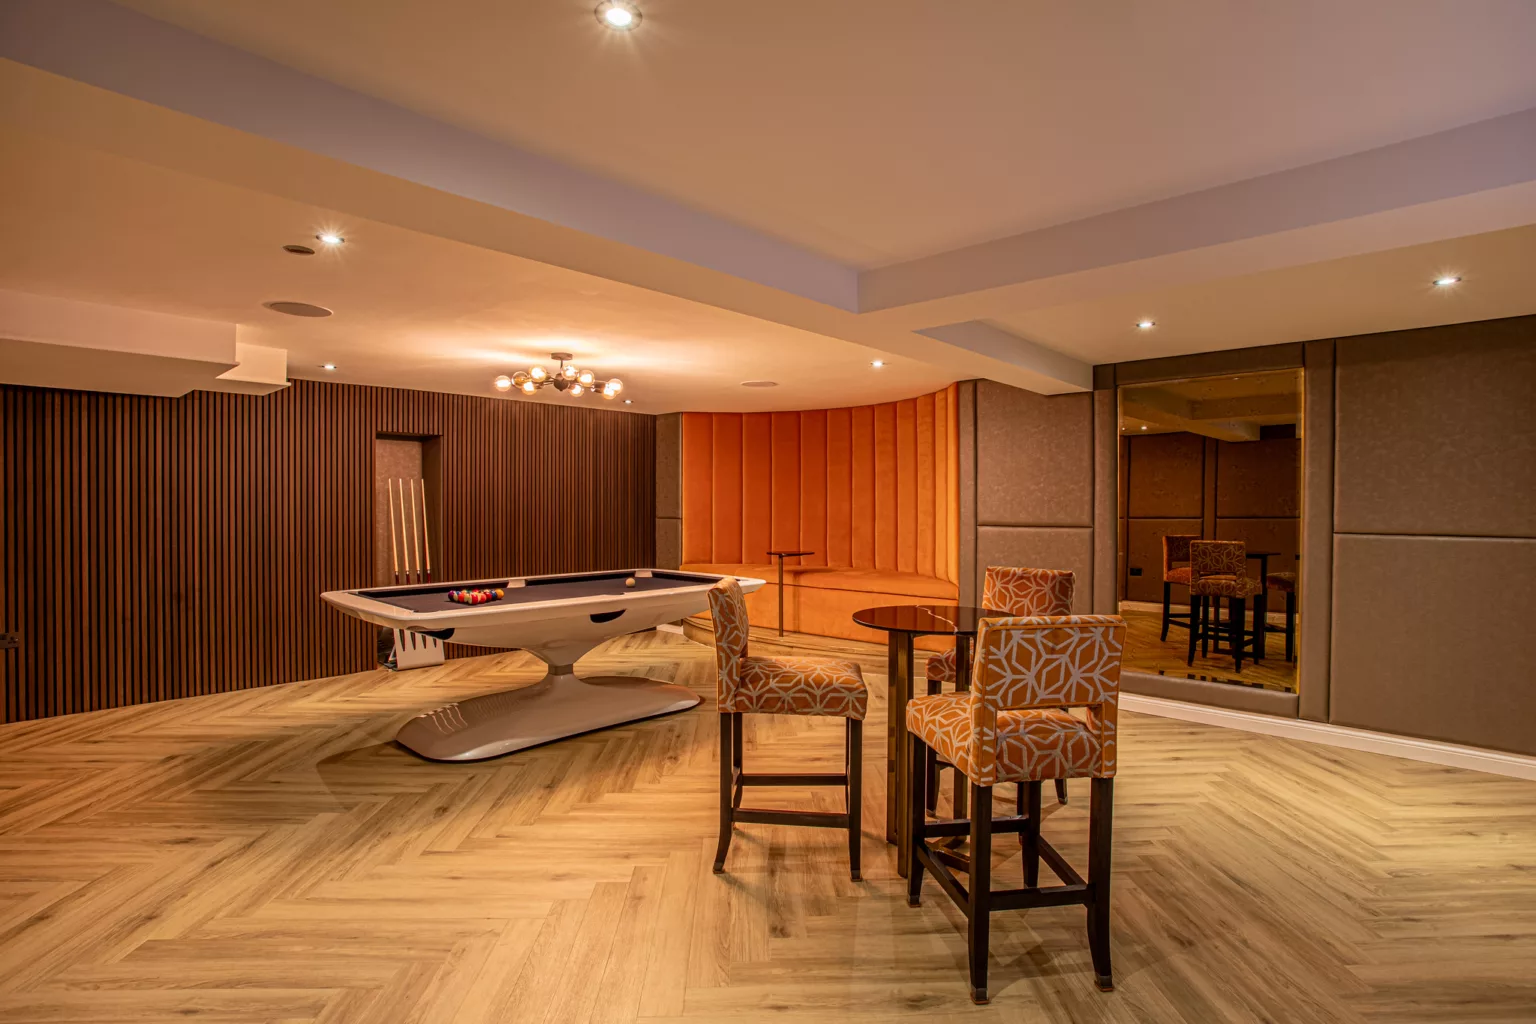 A bespoke modern games room with a vintage feel.